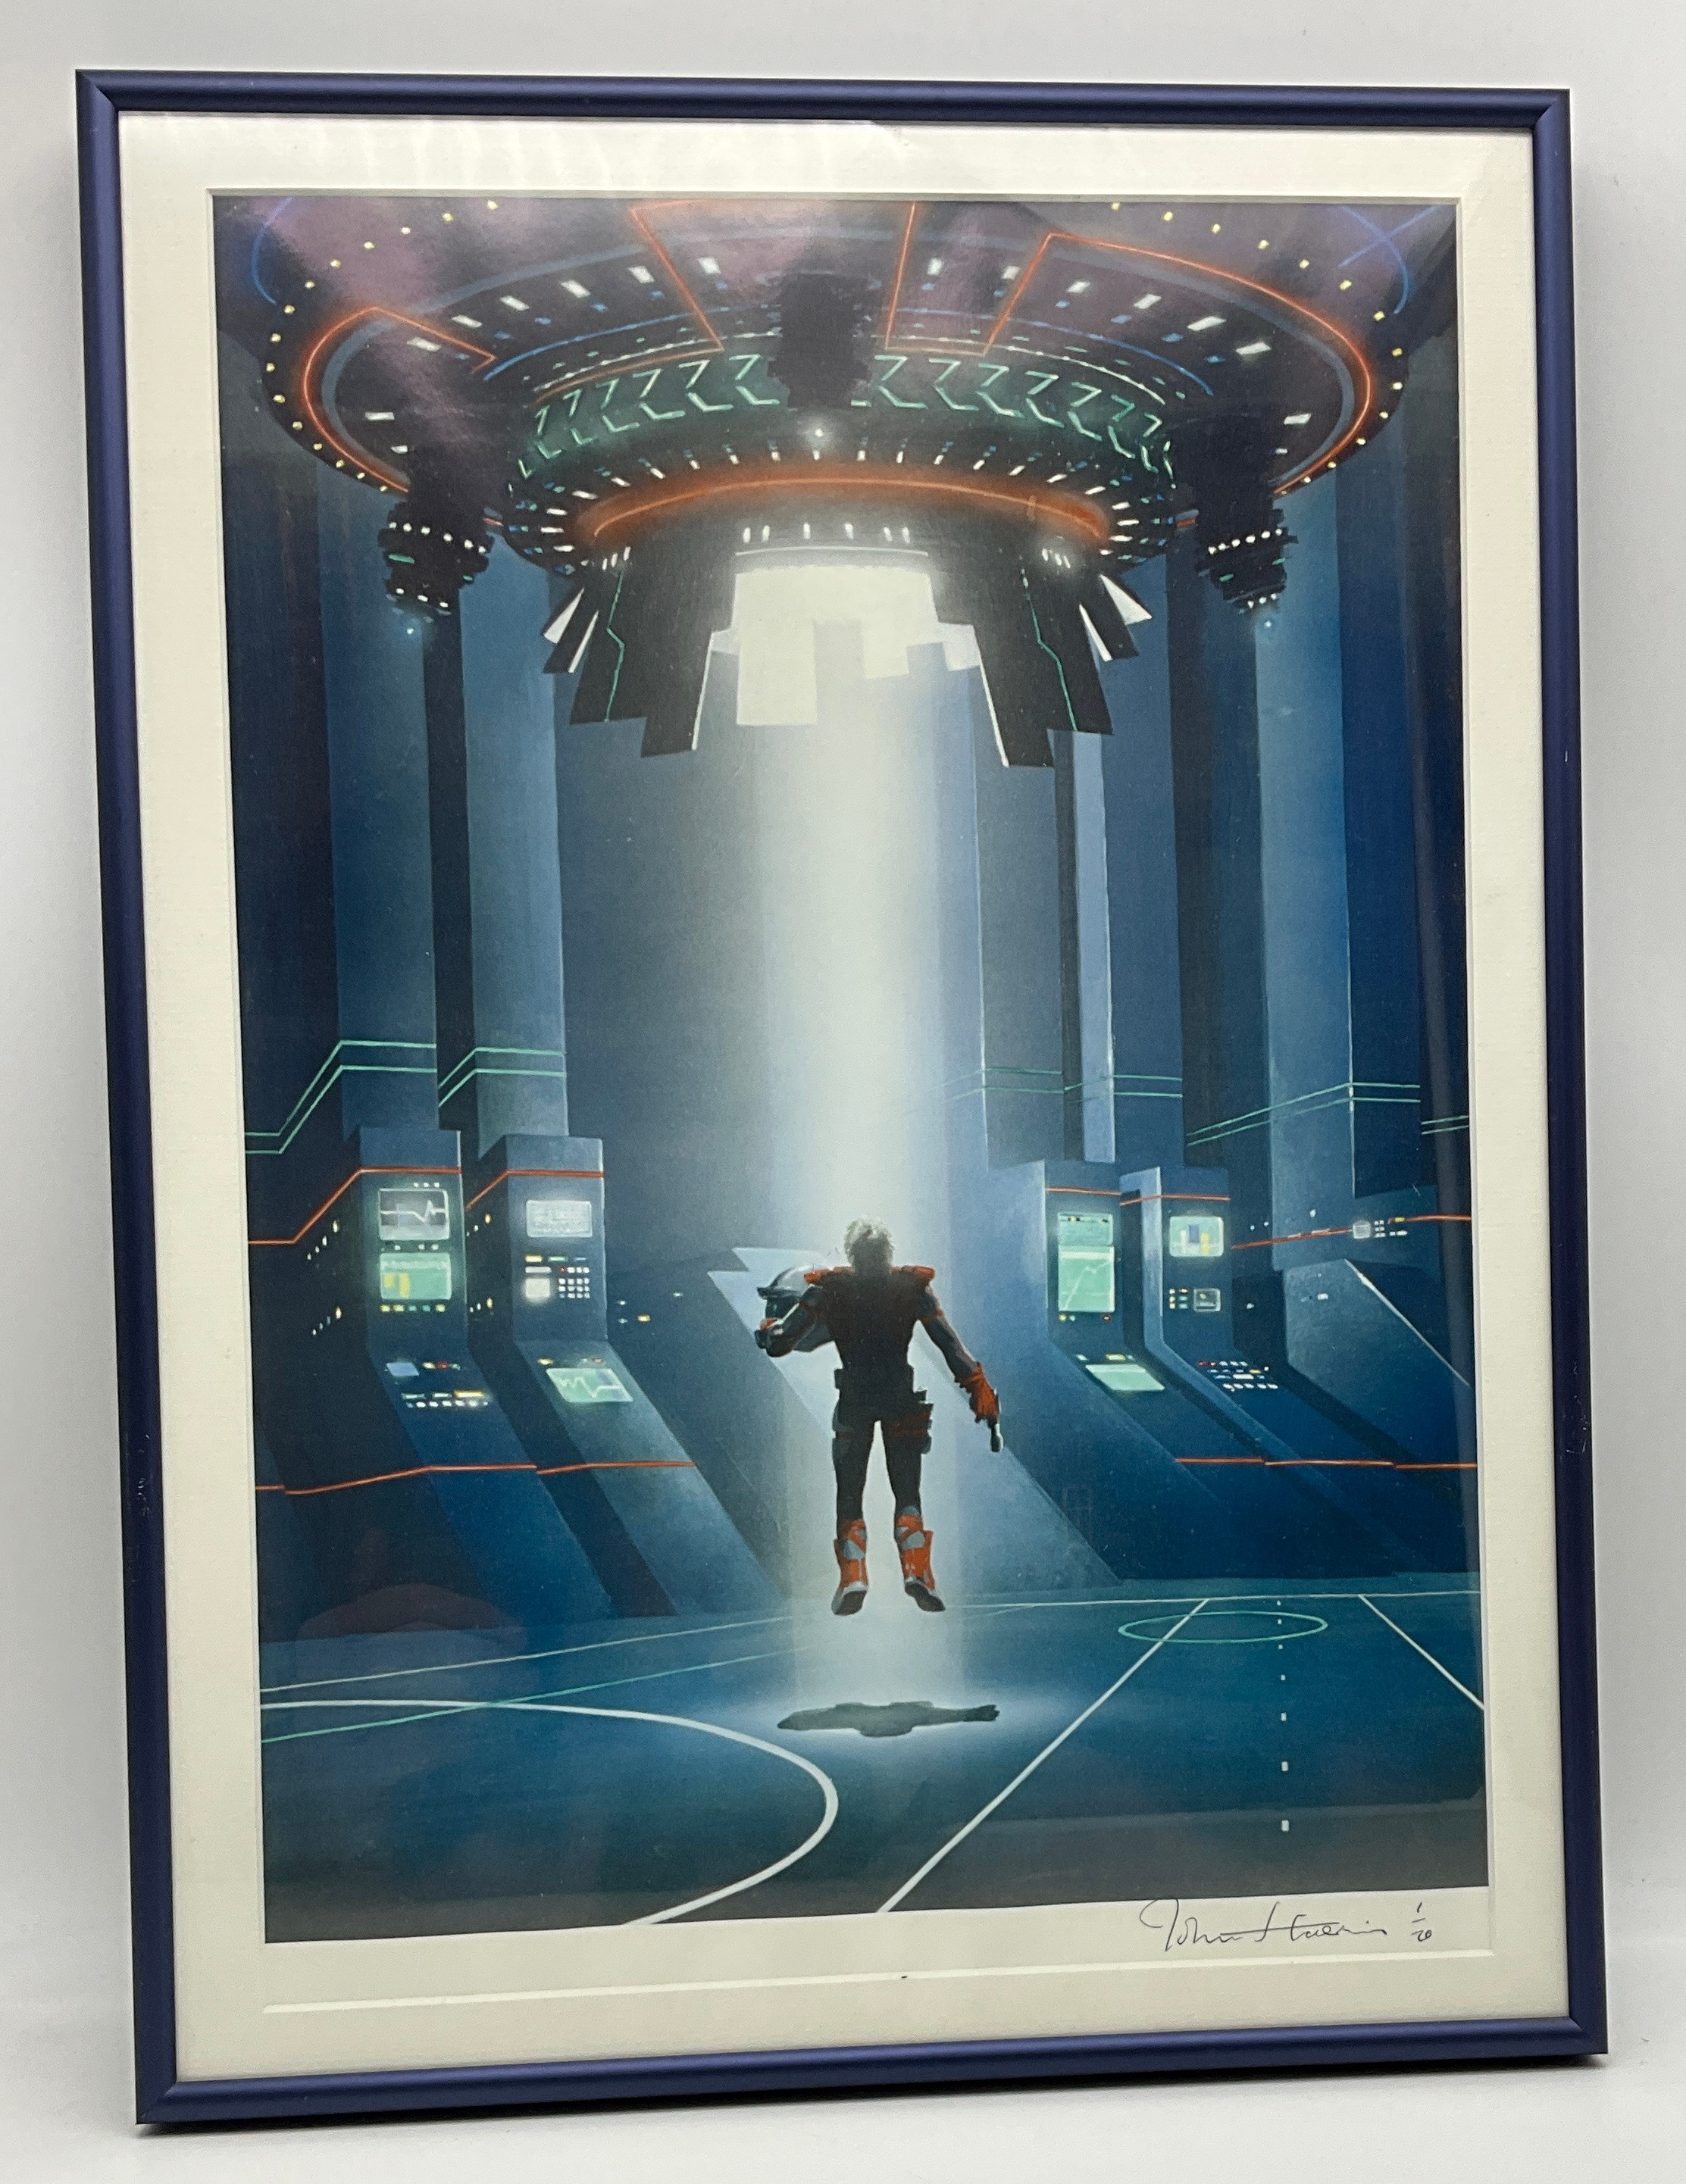 SIGNED LIMITED EDITION FRAMED SCI-FI PRINT - PHOTON I THE THIEVES OF LIGHT BY JOHN HARRIS